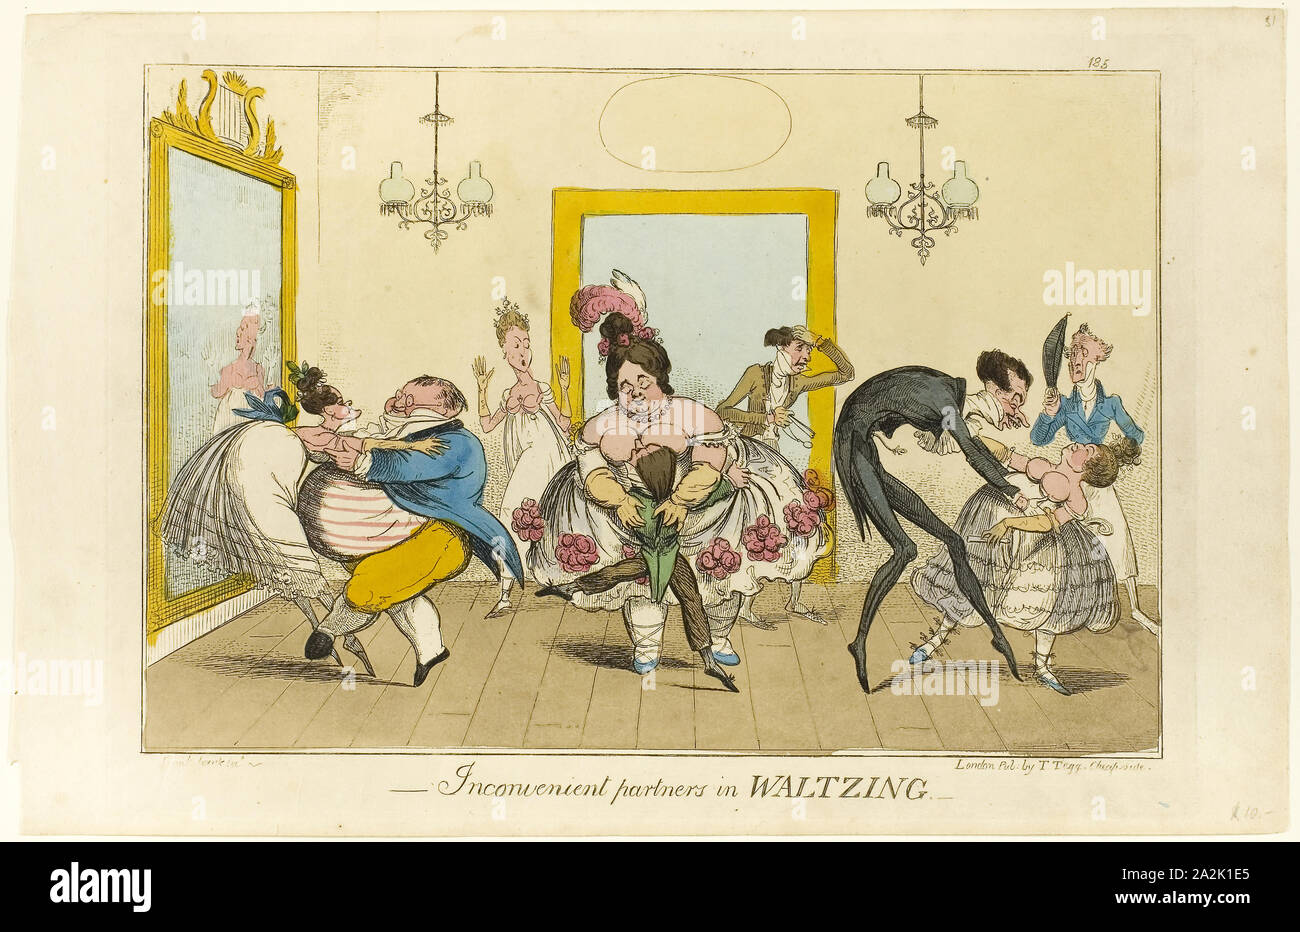 Inconvenient Partners in Waltzing, 1817/19, Isaac Robert Cruikshank (English, 1789-1856), published by Thomas Tegg (English, 1776-1846), England, Hand-colored etching on paper, 222 × 328 mm (image), 250 × 359 mm (plate), 267 × 410 (sheet Stock Photo